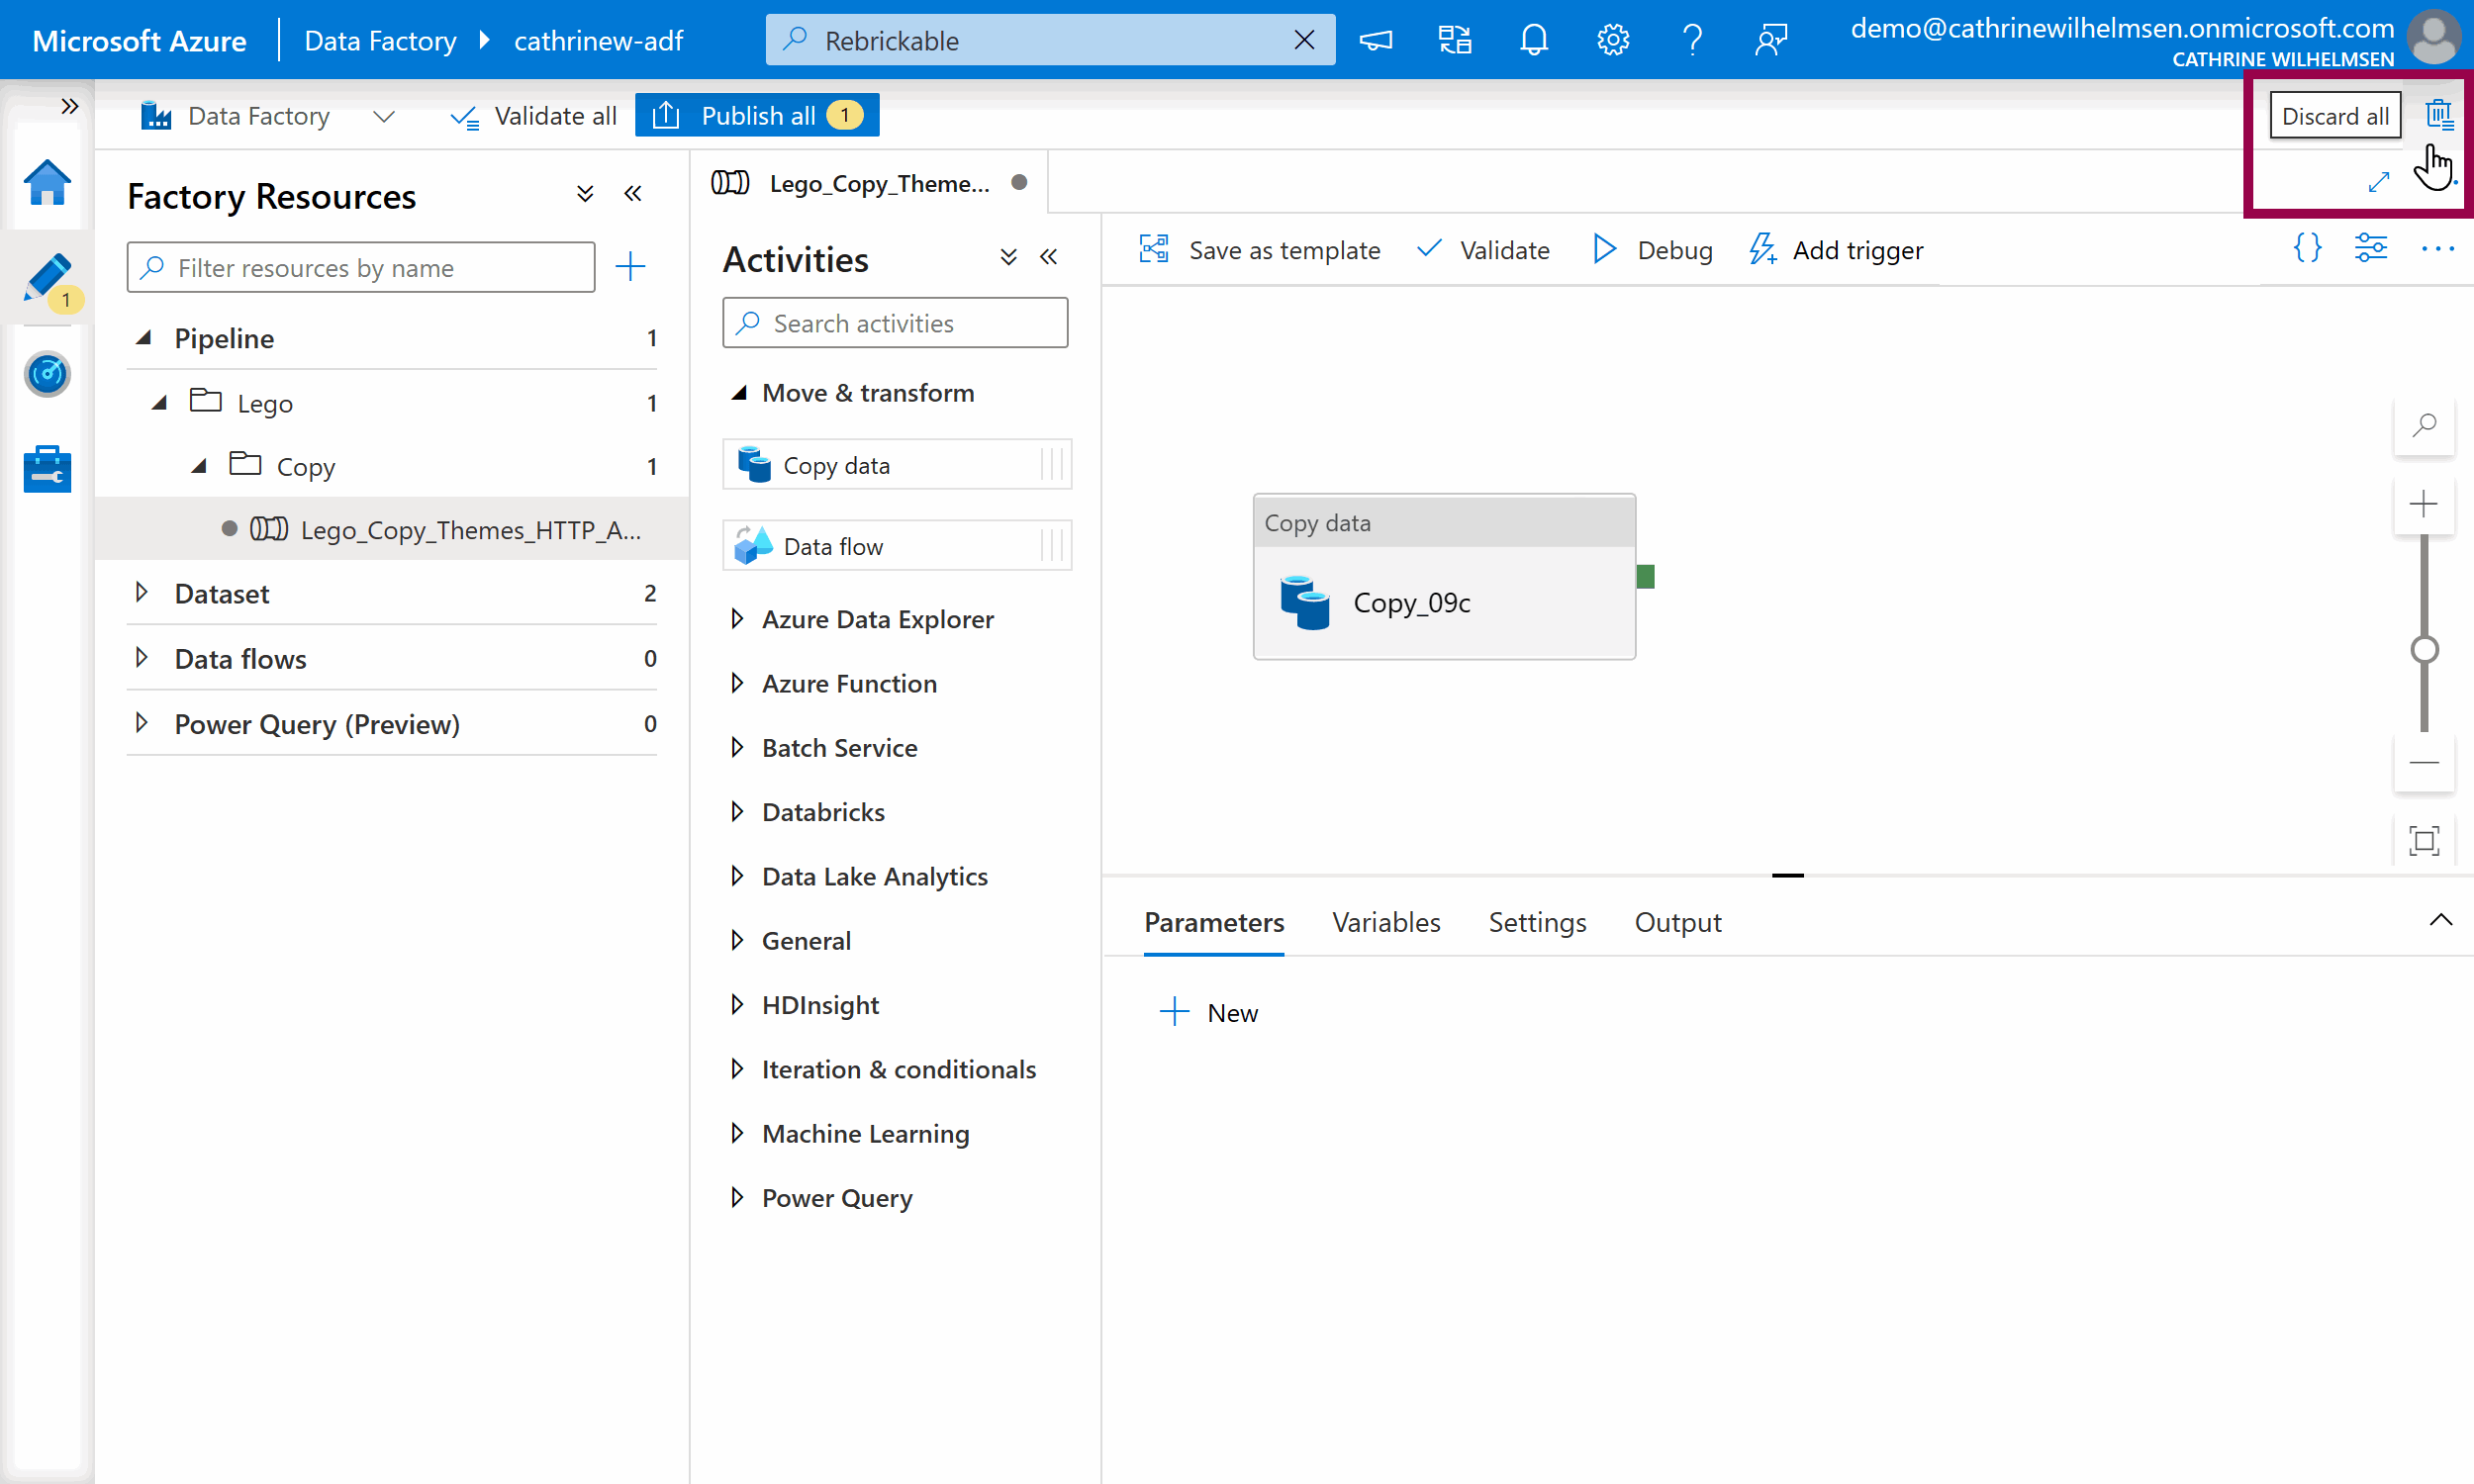 Screenshot of the Azure Data Factory interface with the Discard All button highlighted.